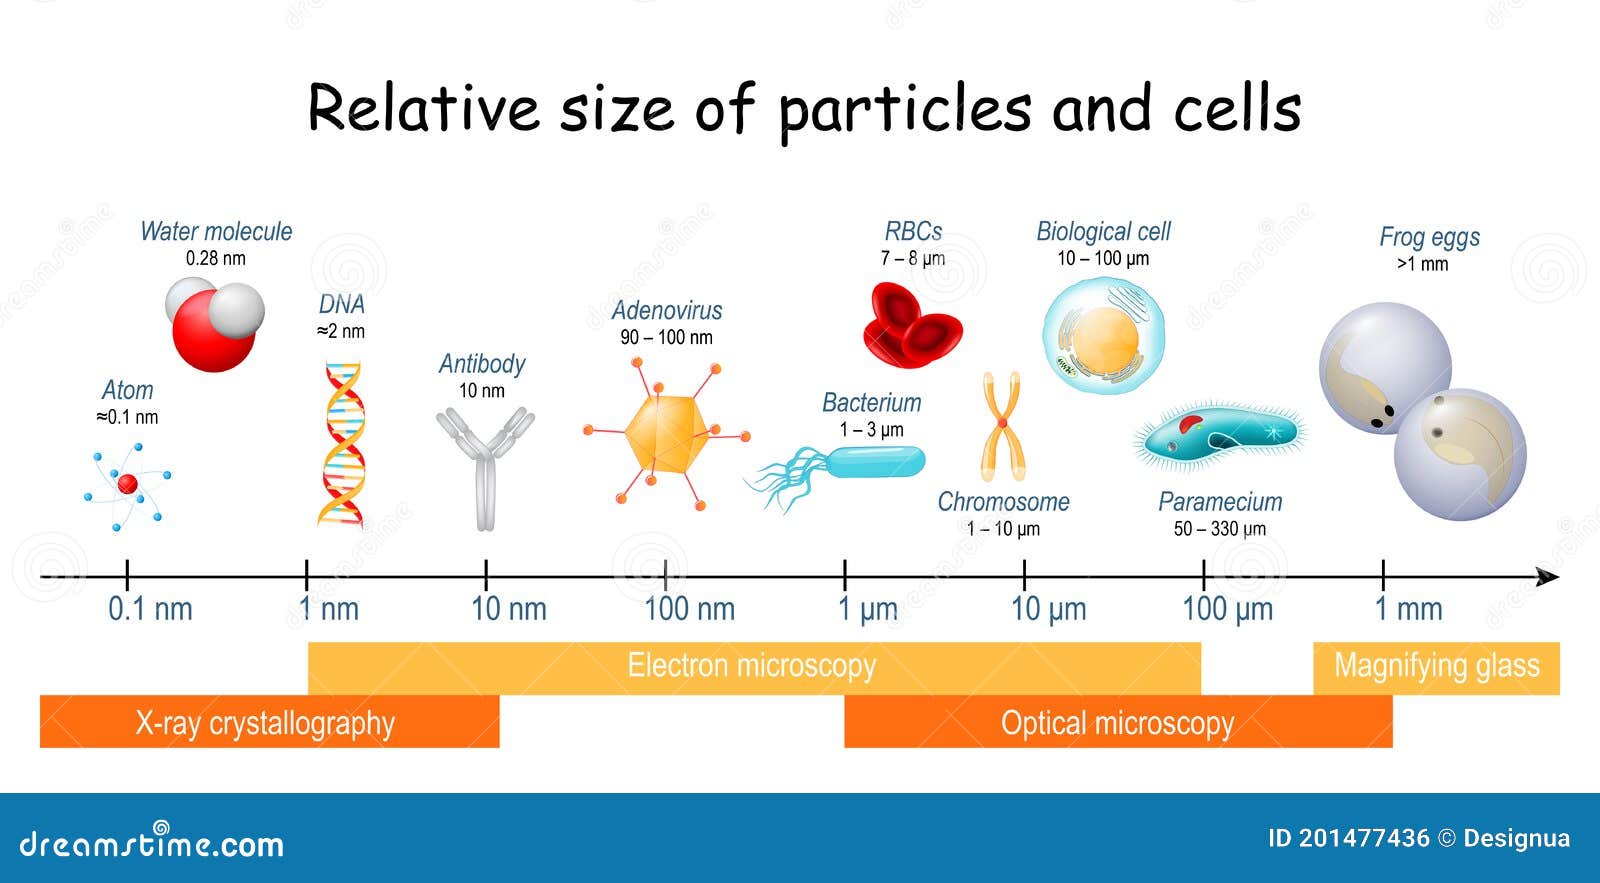 comparison size of particles and cells on biological scale